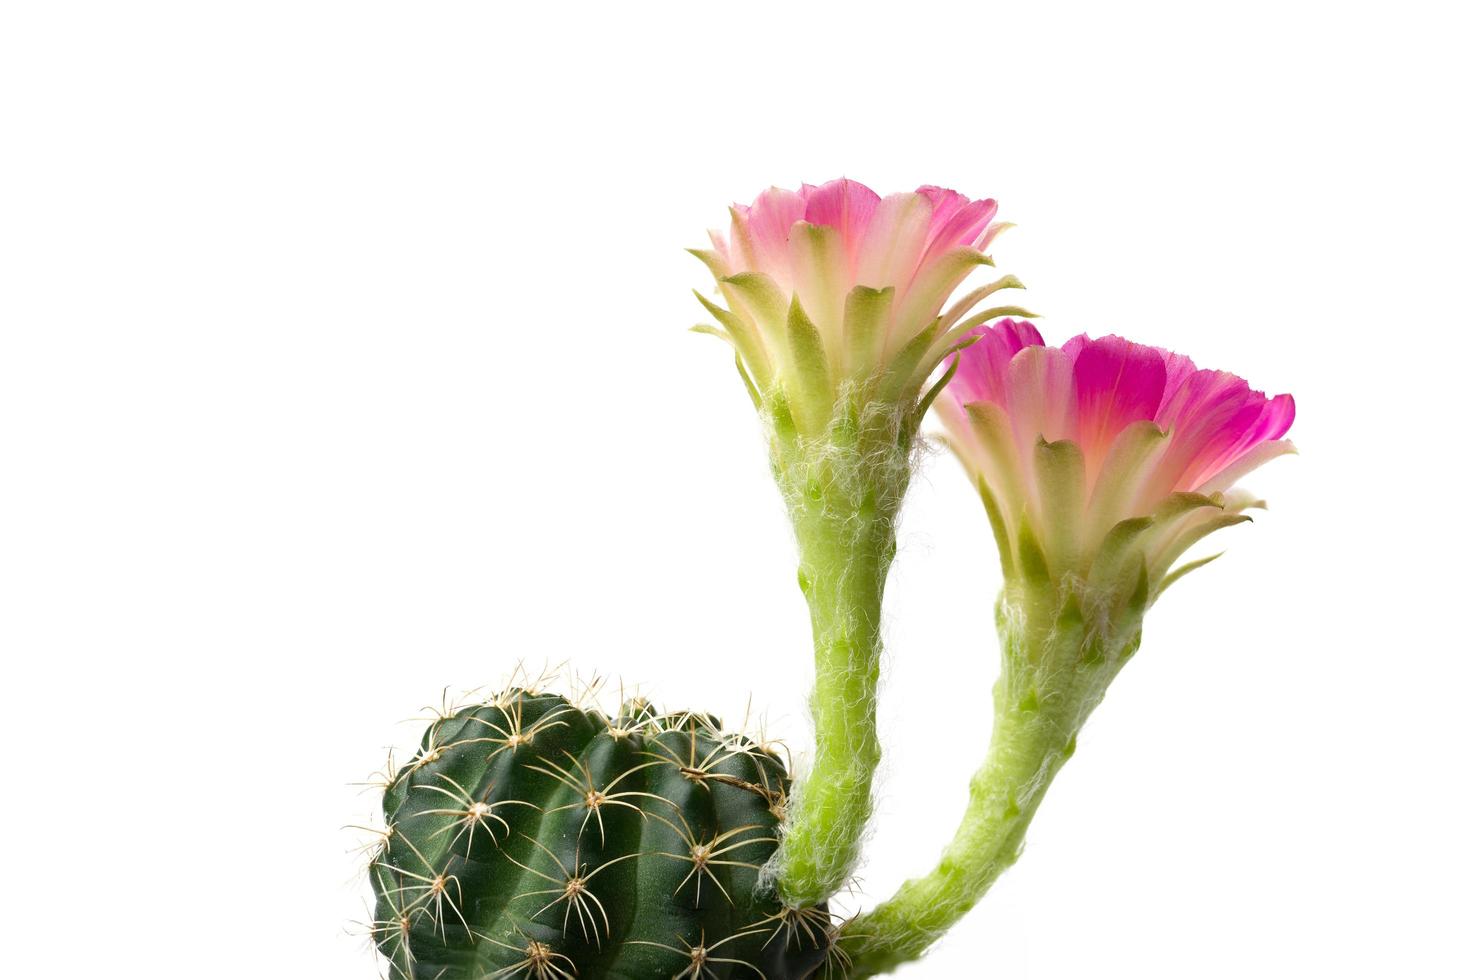 Echinopsis hybride with pink blossoms photo